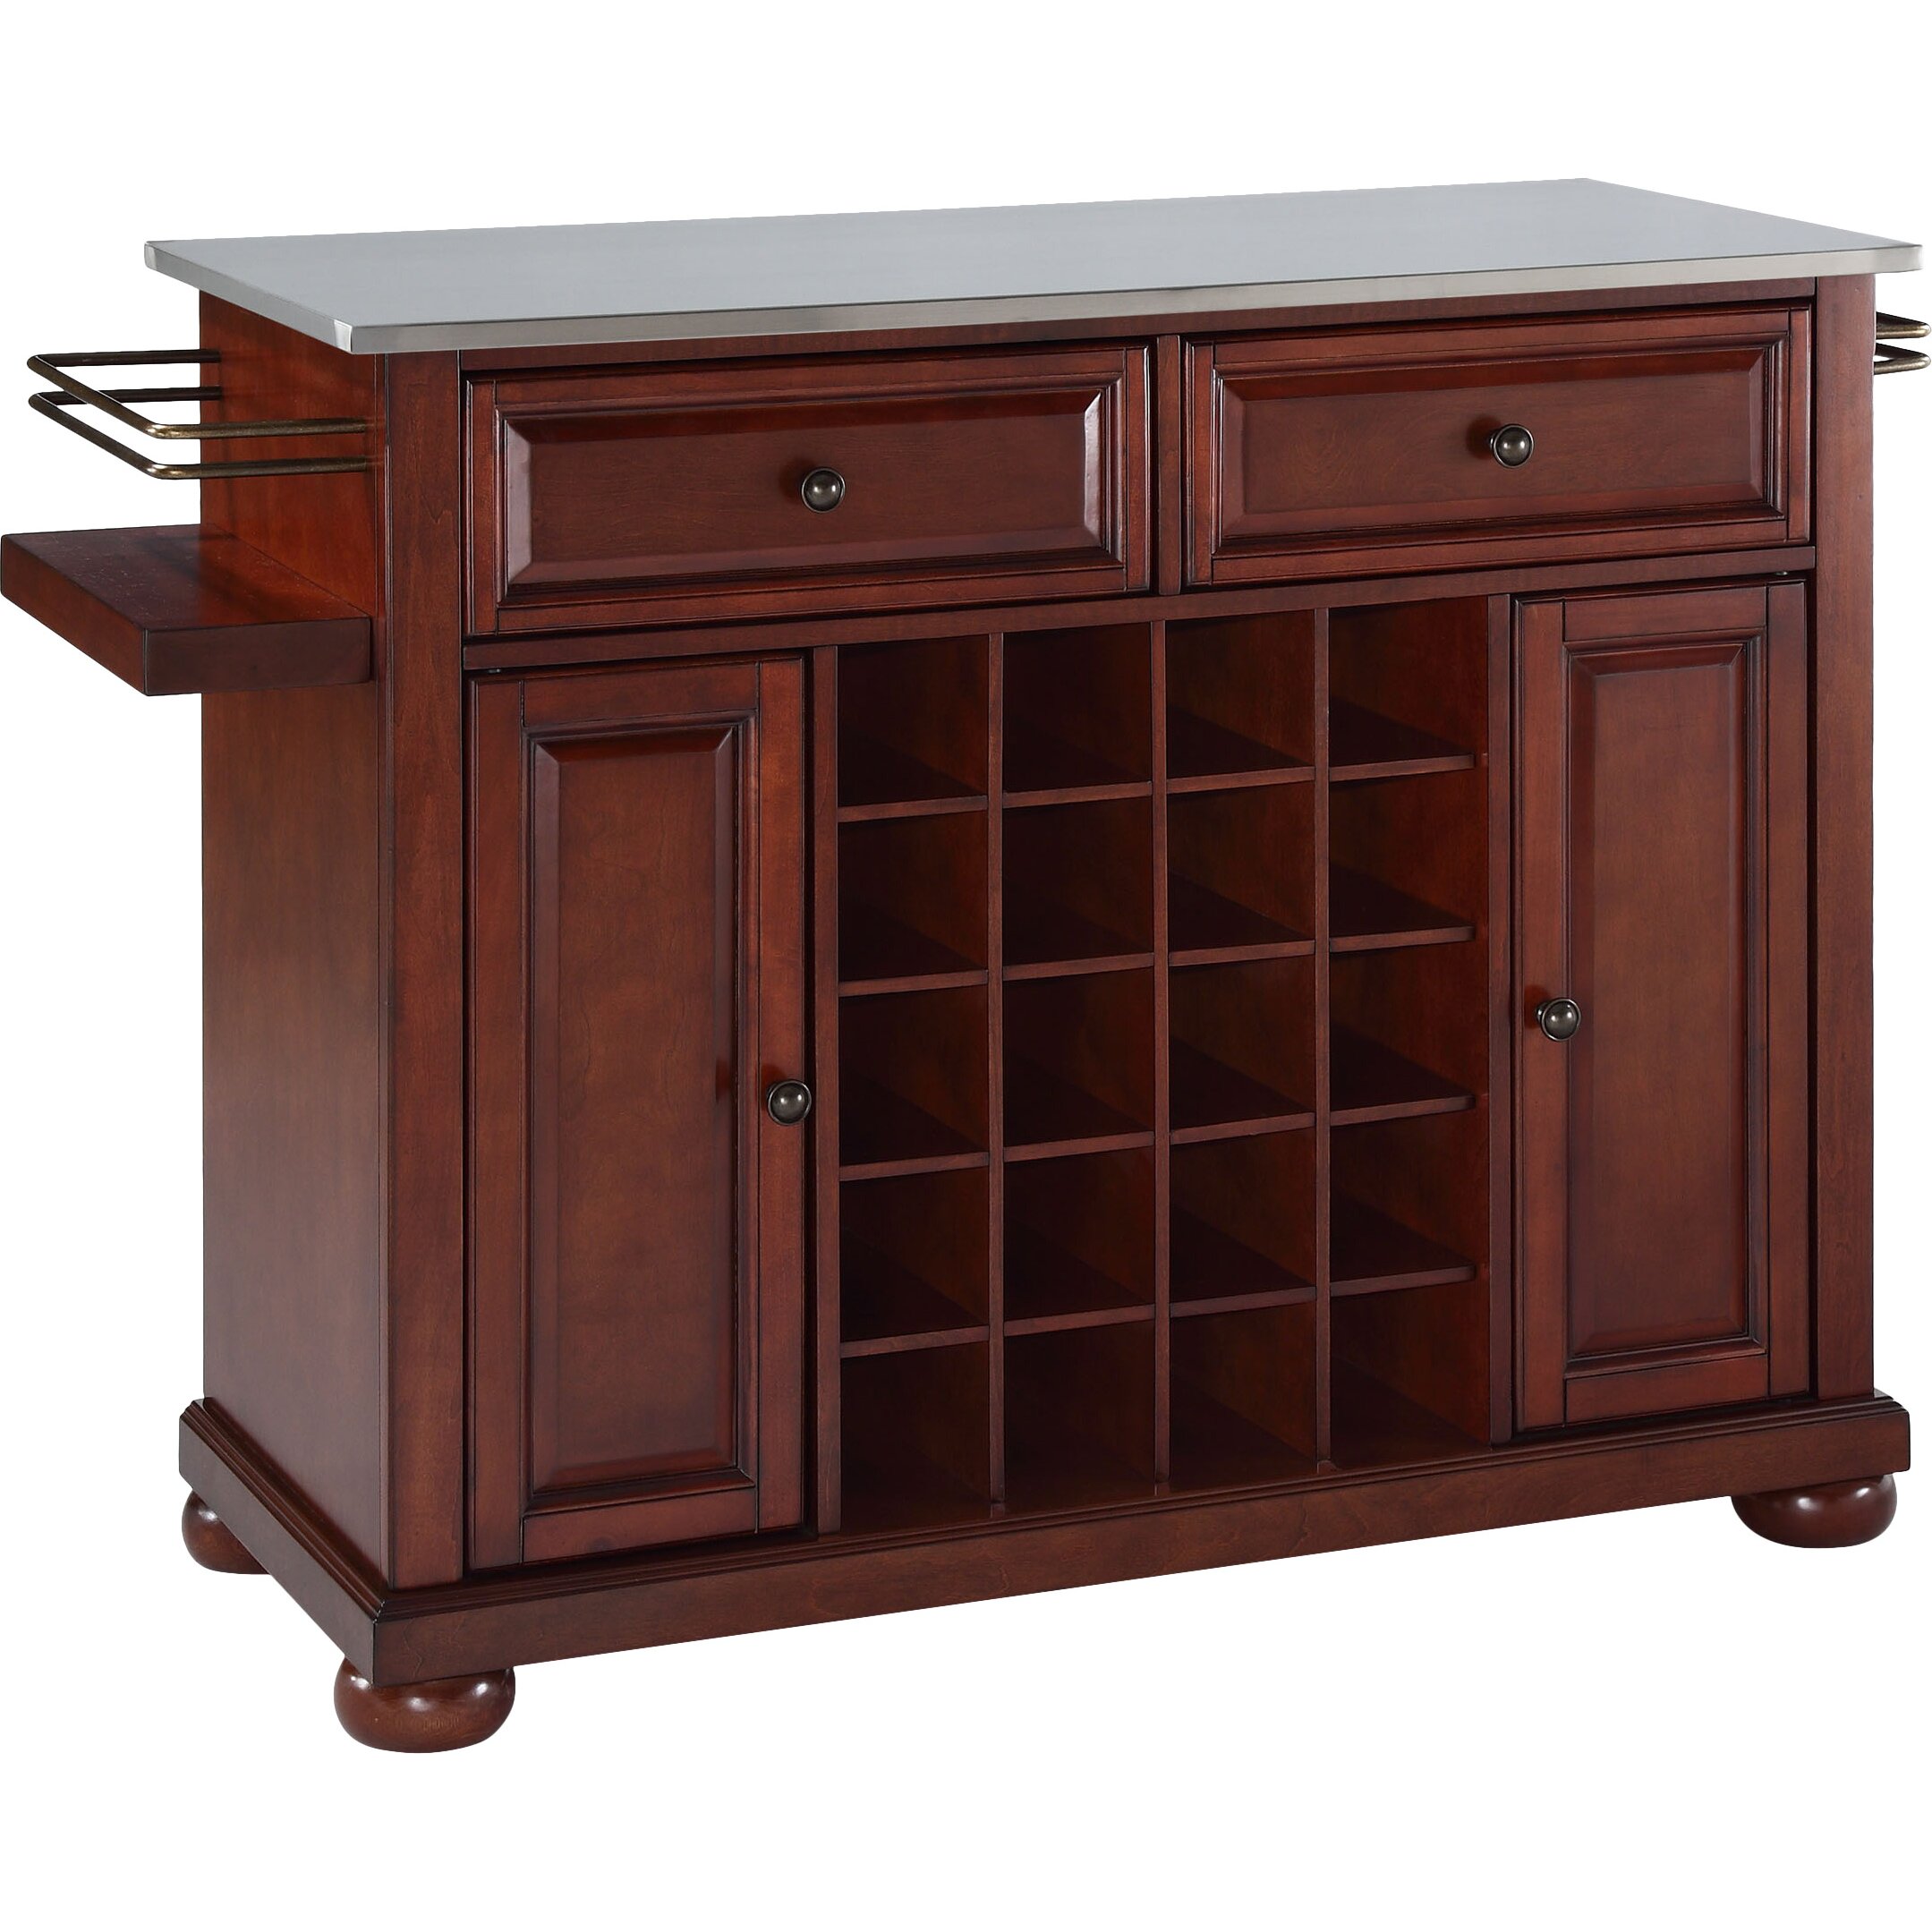 Crosley Alexandria Kitchen Island with Stainless Steel Top ...